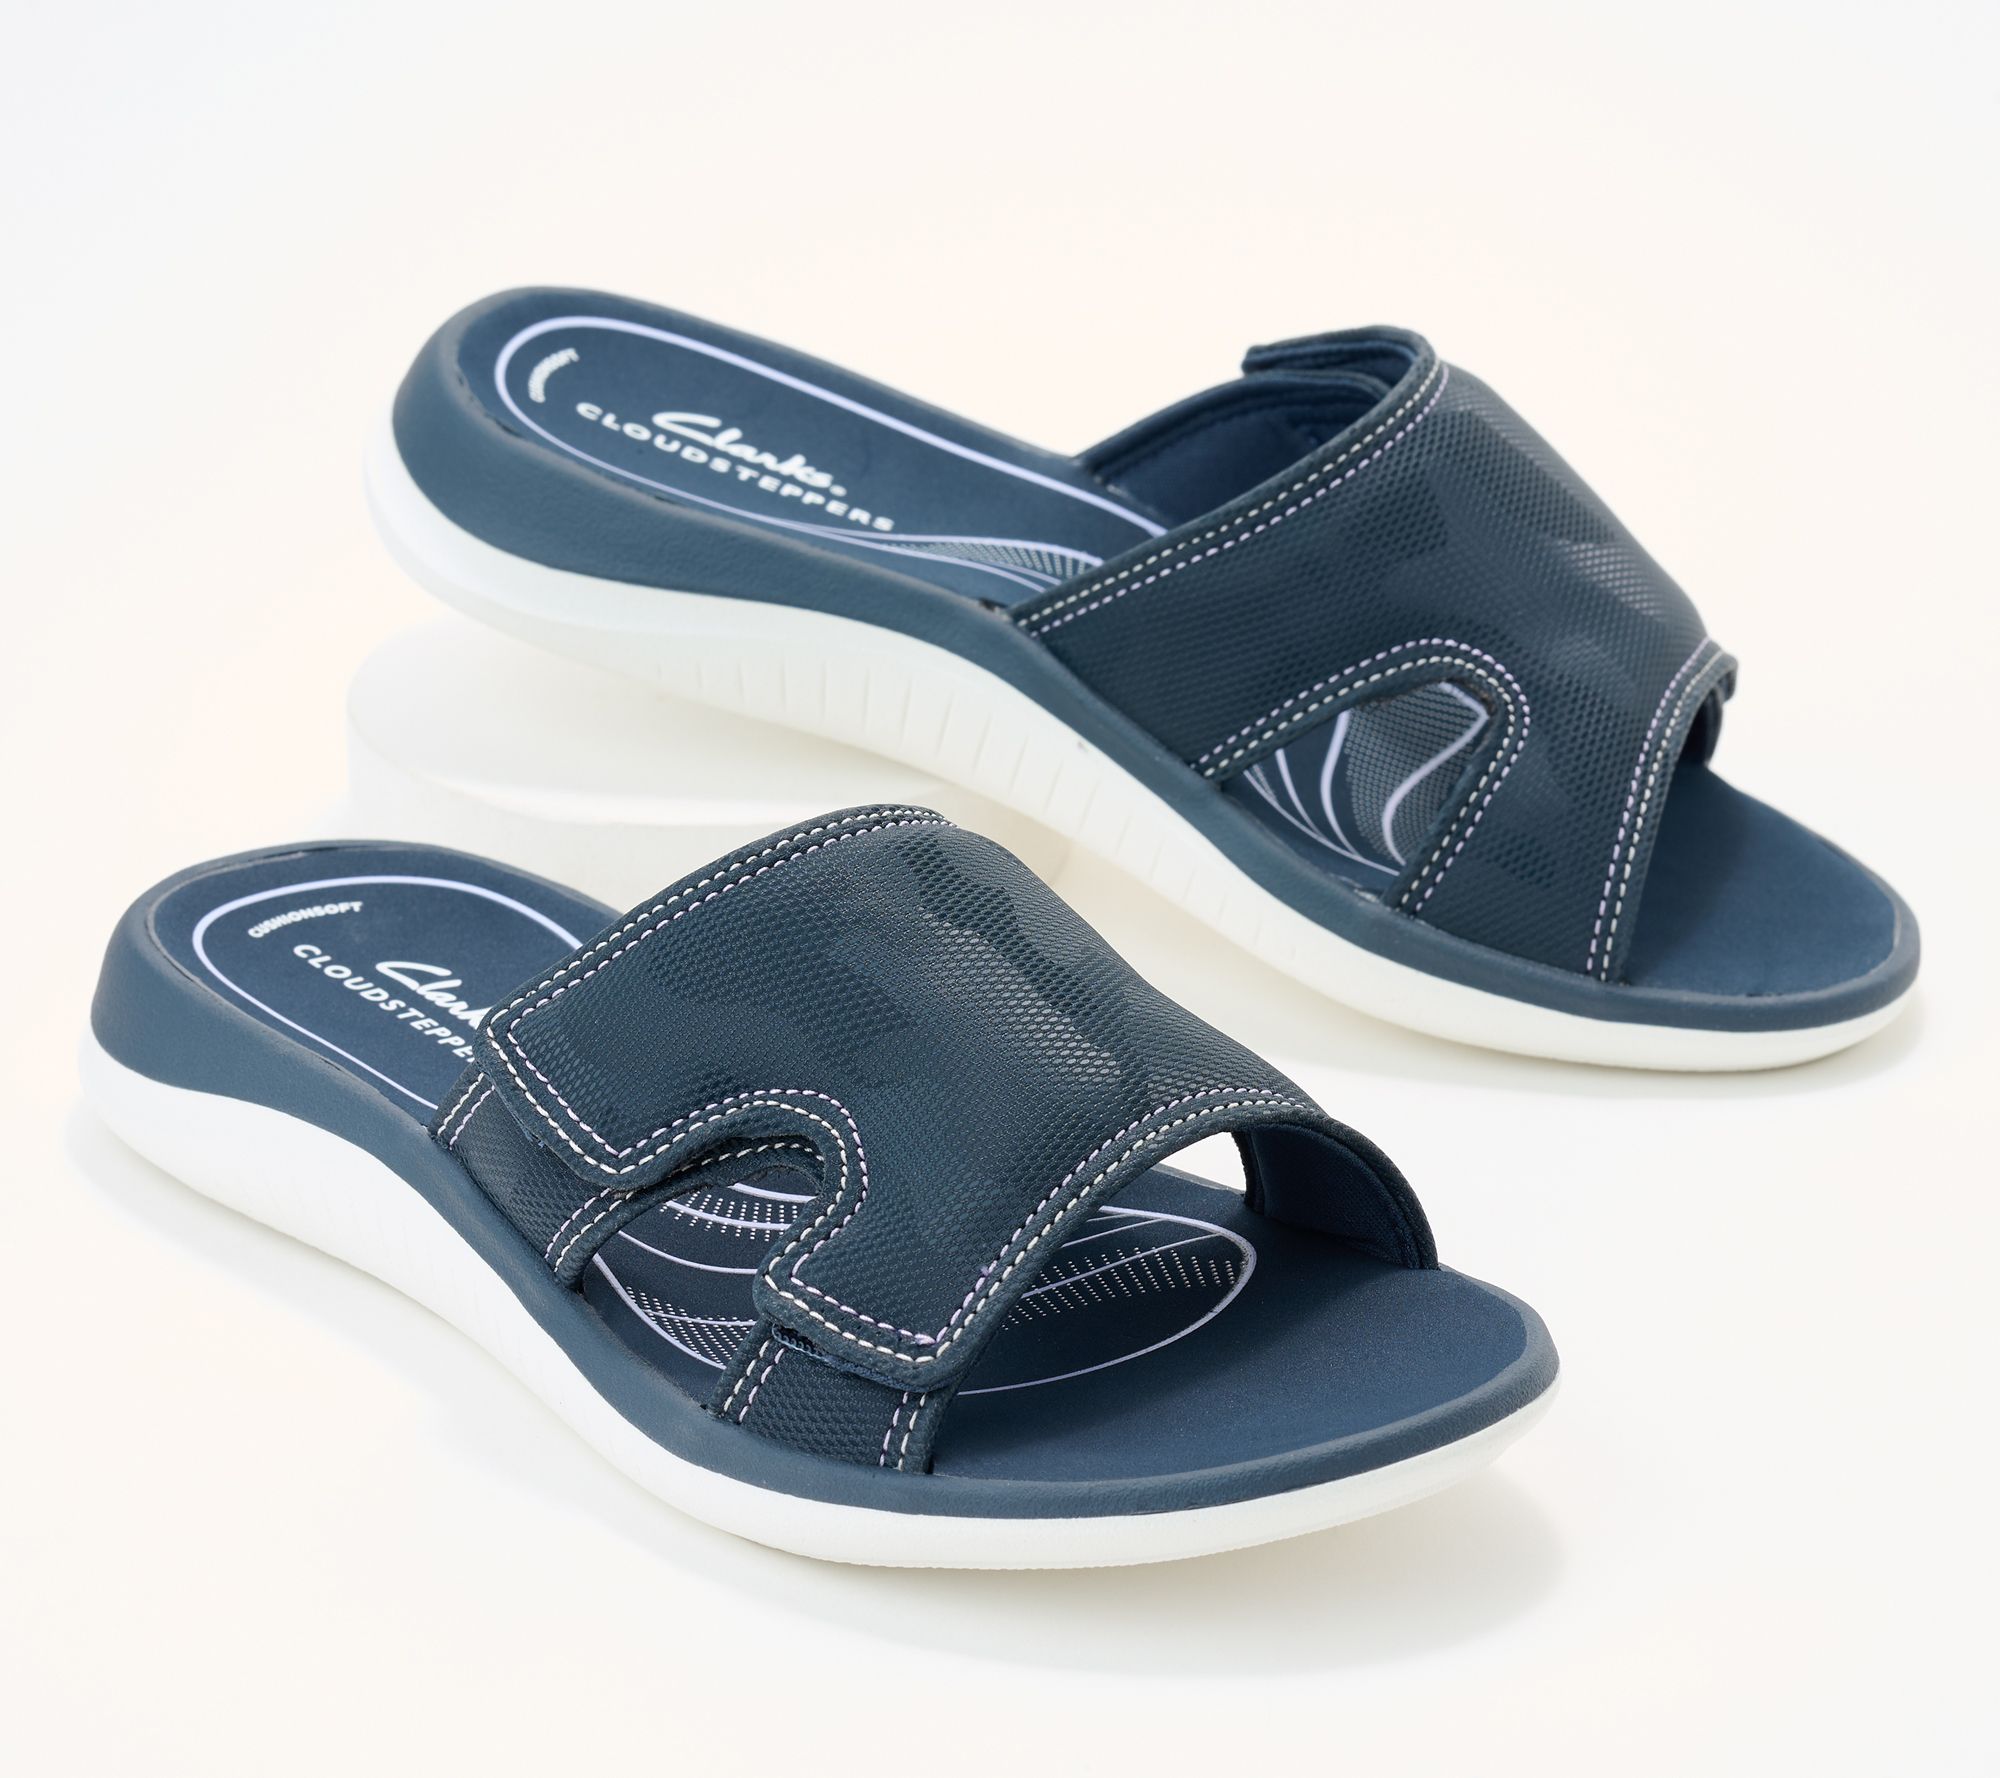 Clarks Cloudsteppers Anatomic Sandals - Glide Bay - QVC.com